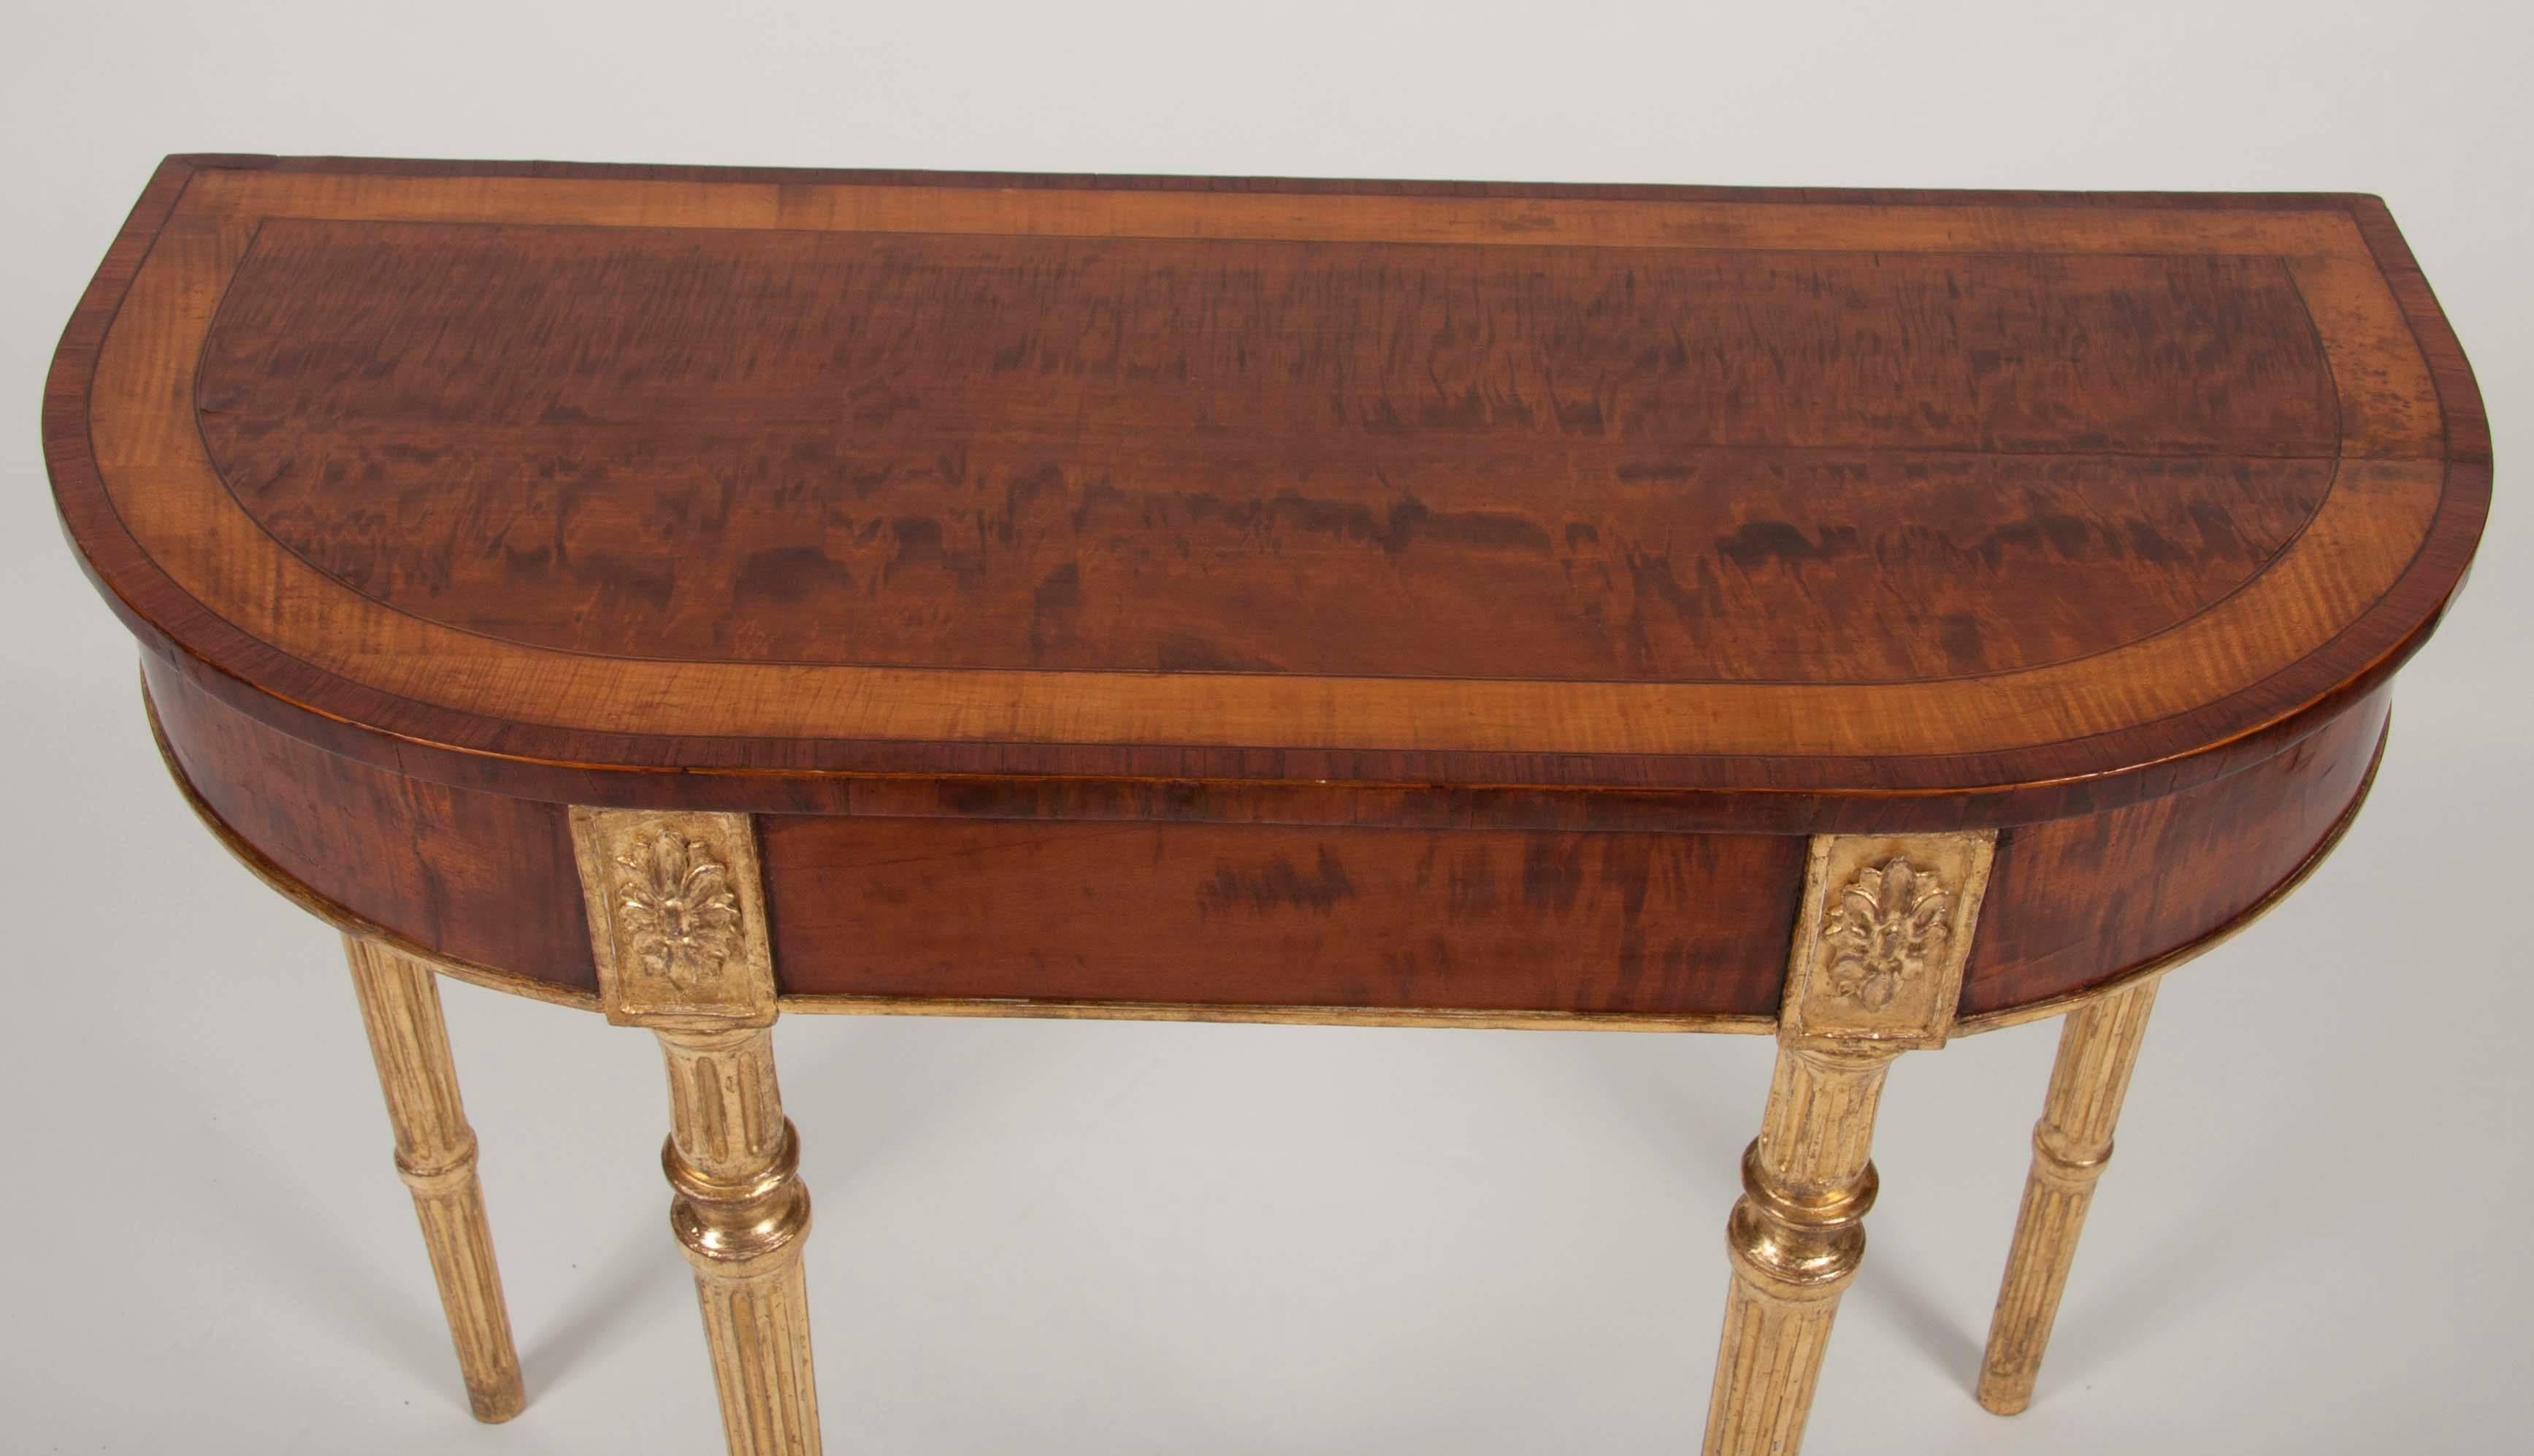 18th Century Pair of Matched George III Mahogany and Satinwood Parcel-Gilt Console Tables